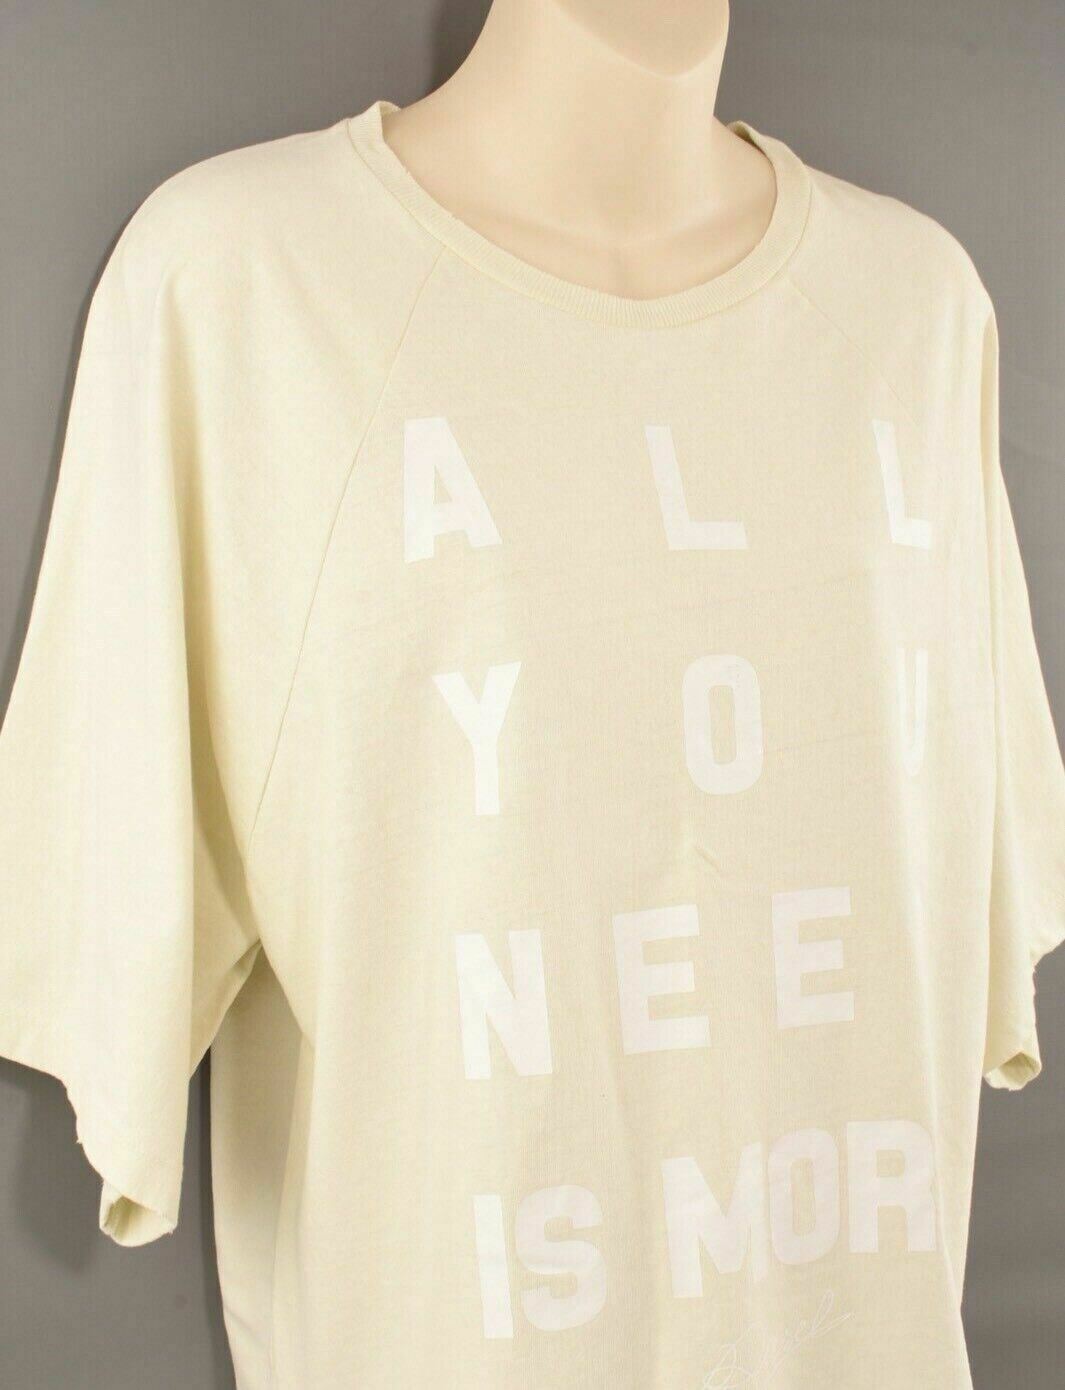 DIESEL Women's Girls' ALL YOU NEED IS MORE Boxy Top, Beige, size S /size M